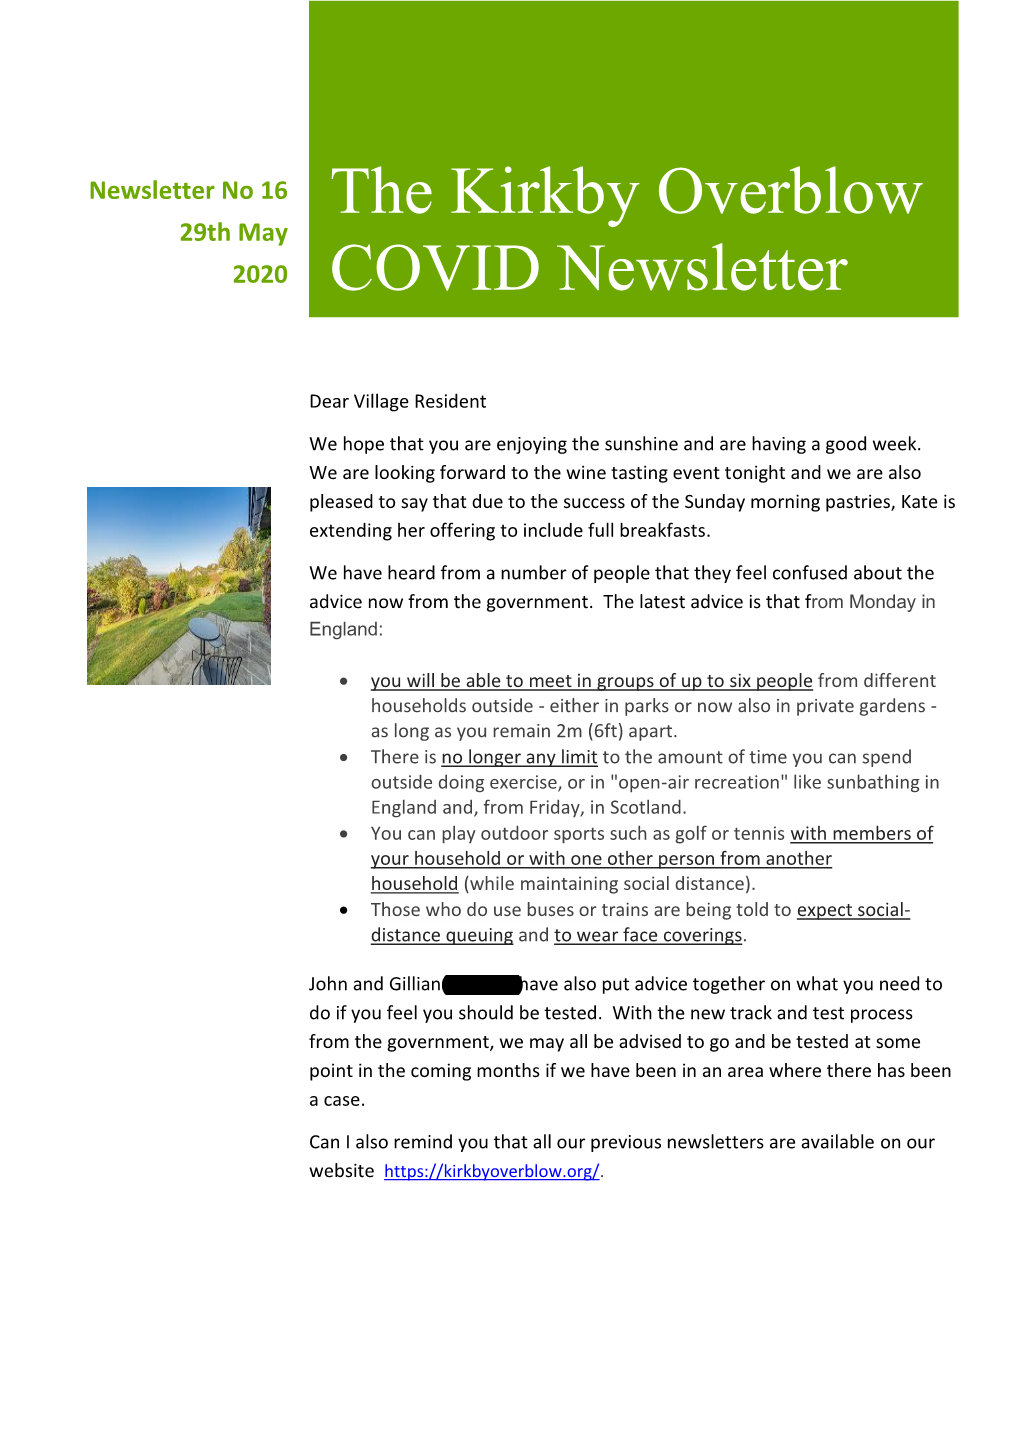 The Kirkby Overblow COVID Newsletter